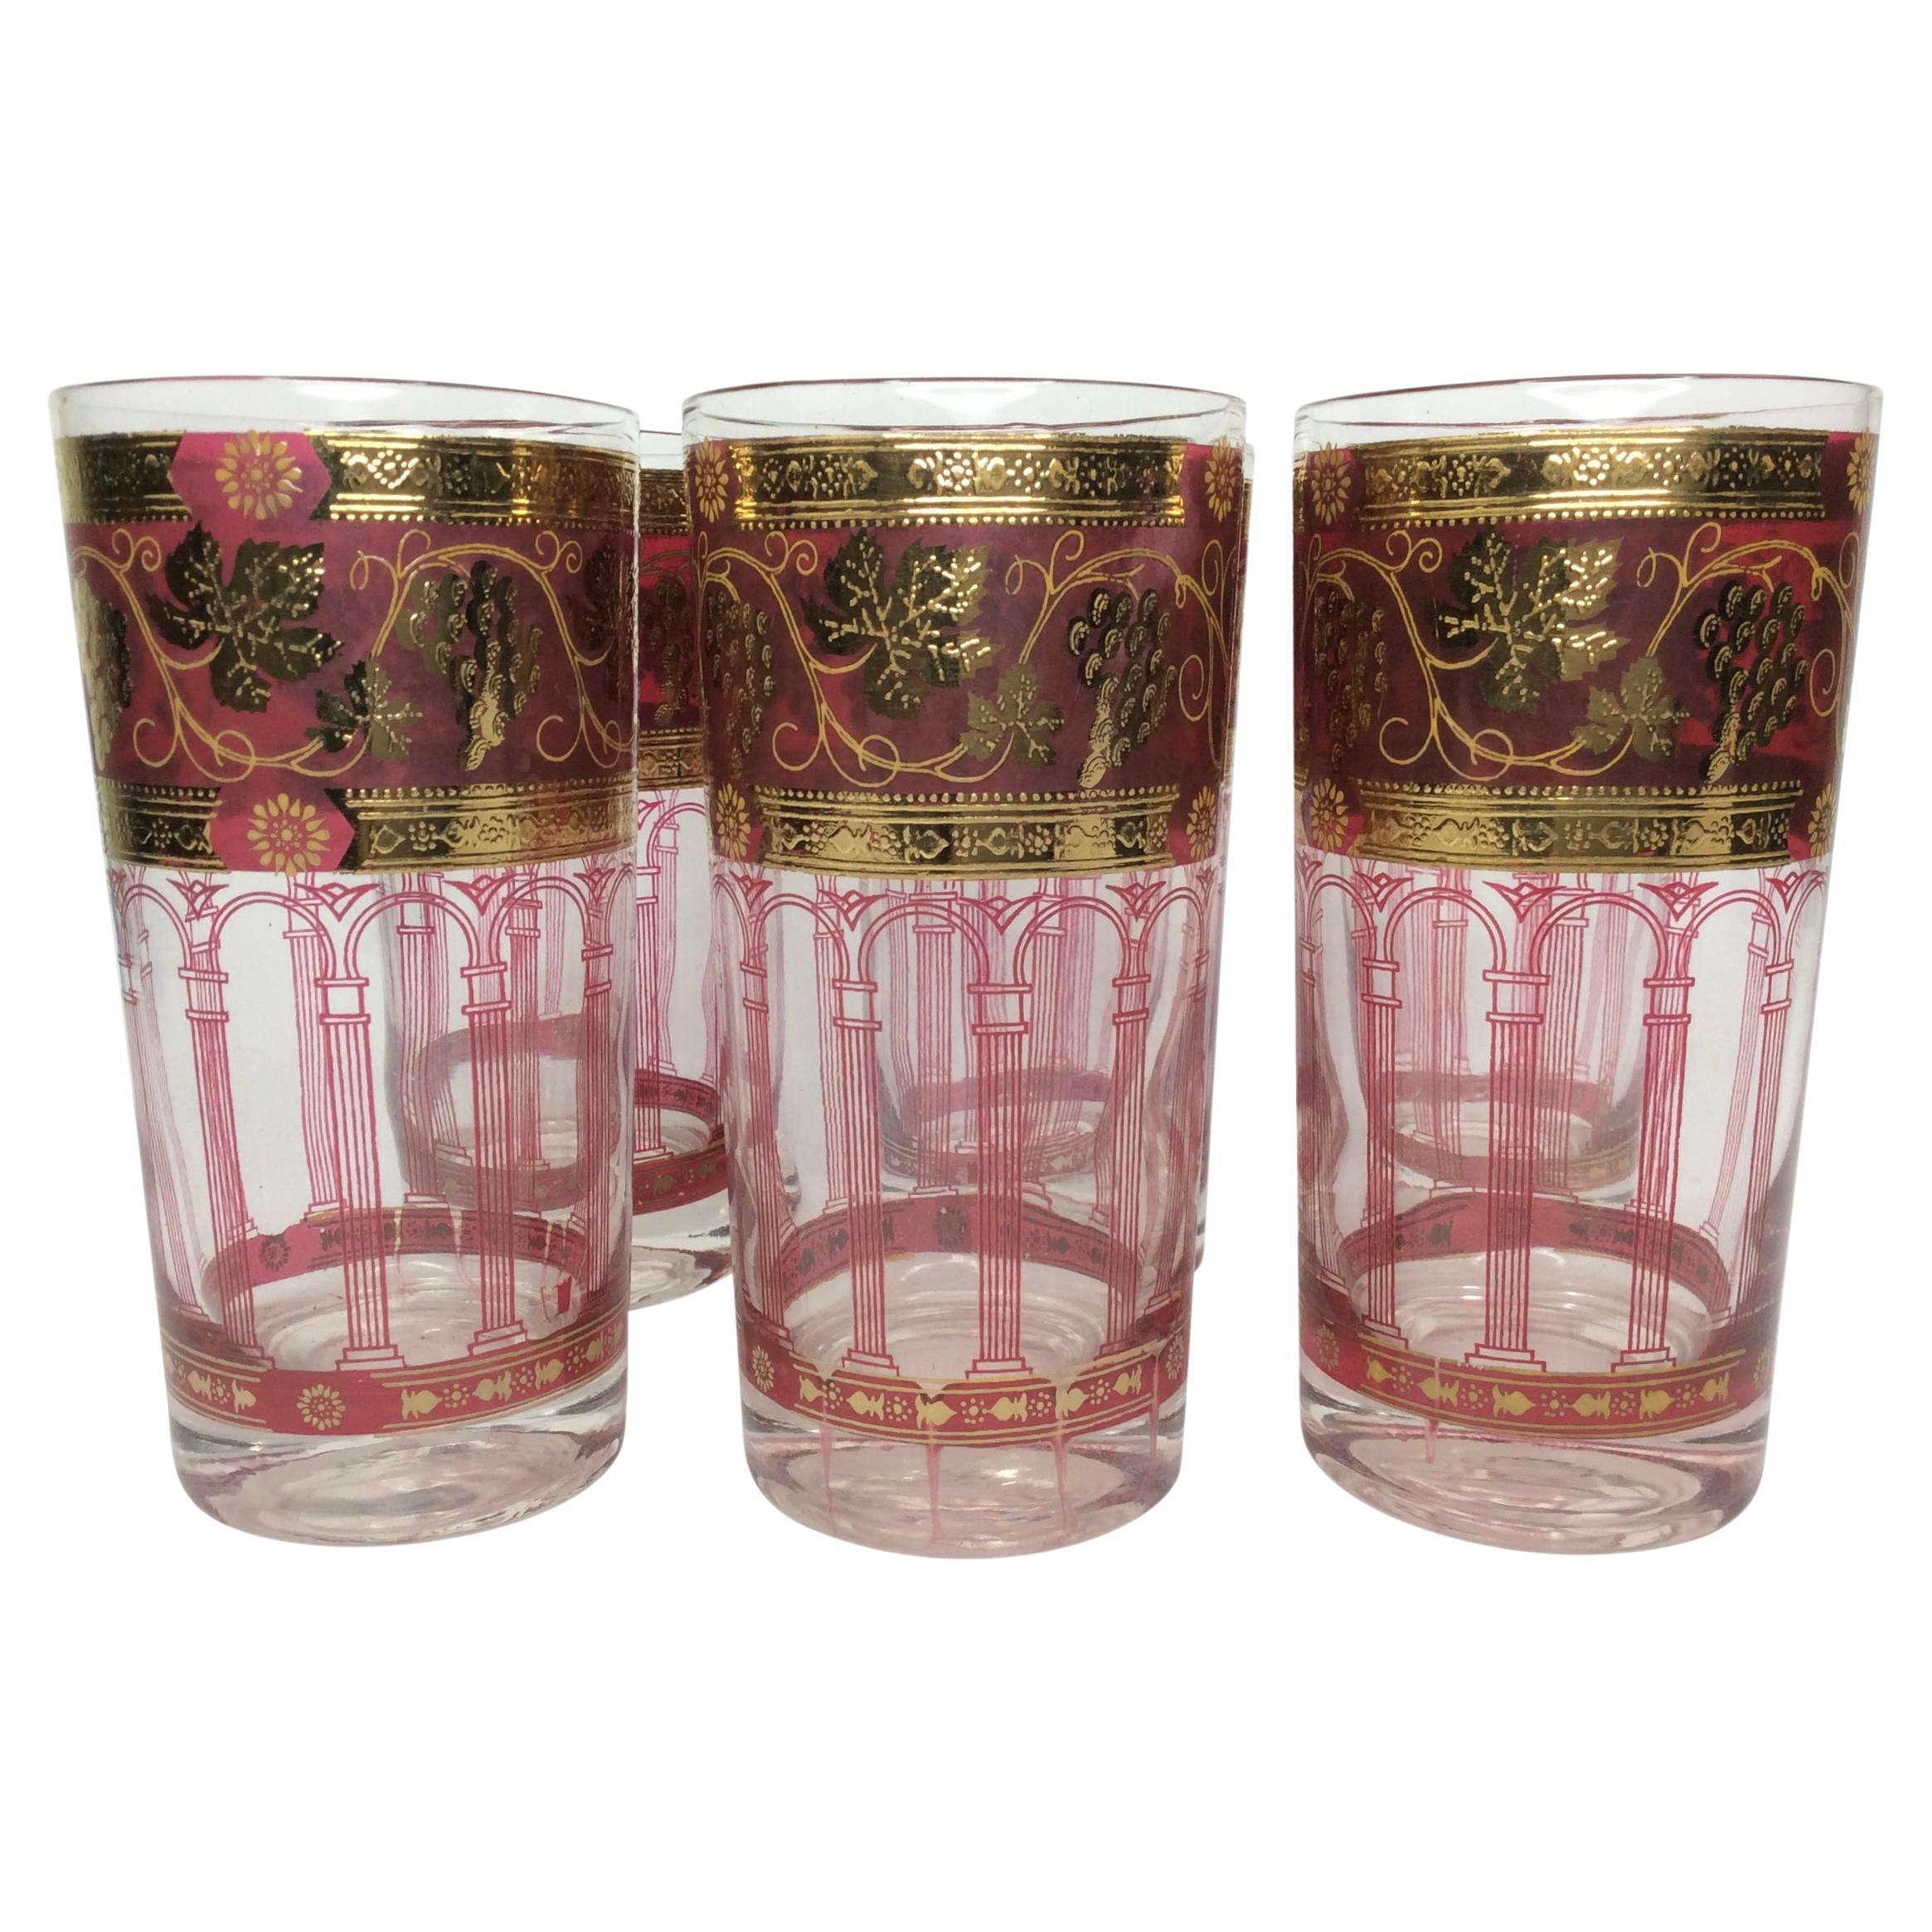 Vintage Cera Highball Glasses with Grapes and Arched Columns - Set of 6 For Sale